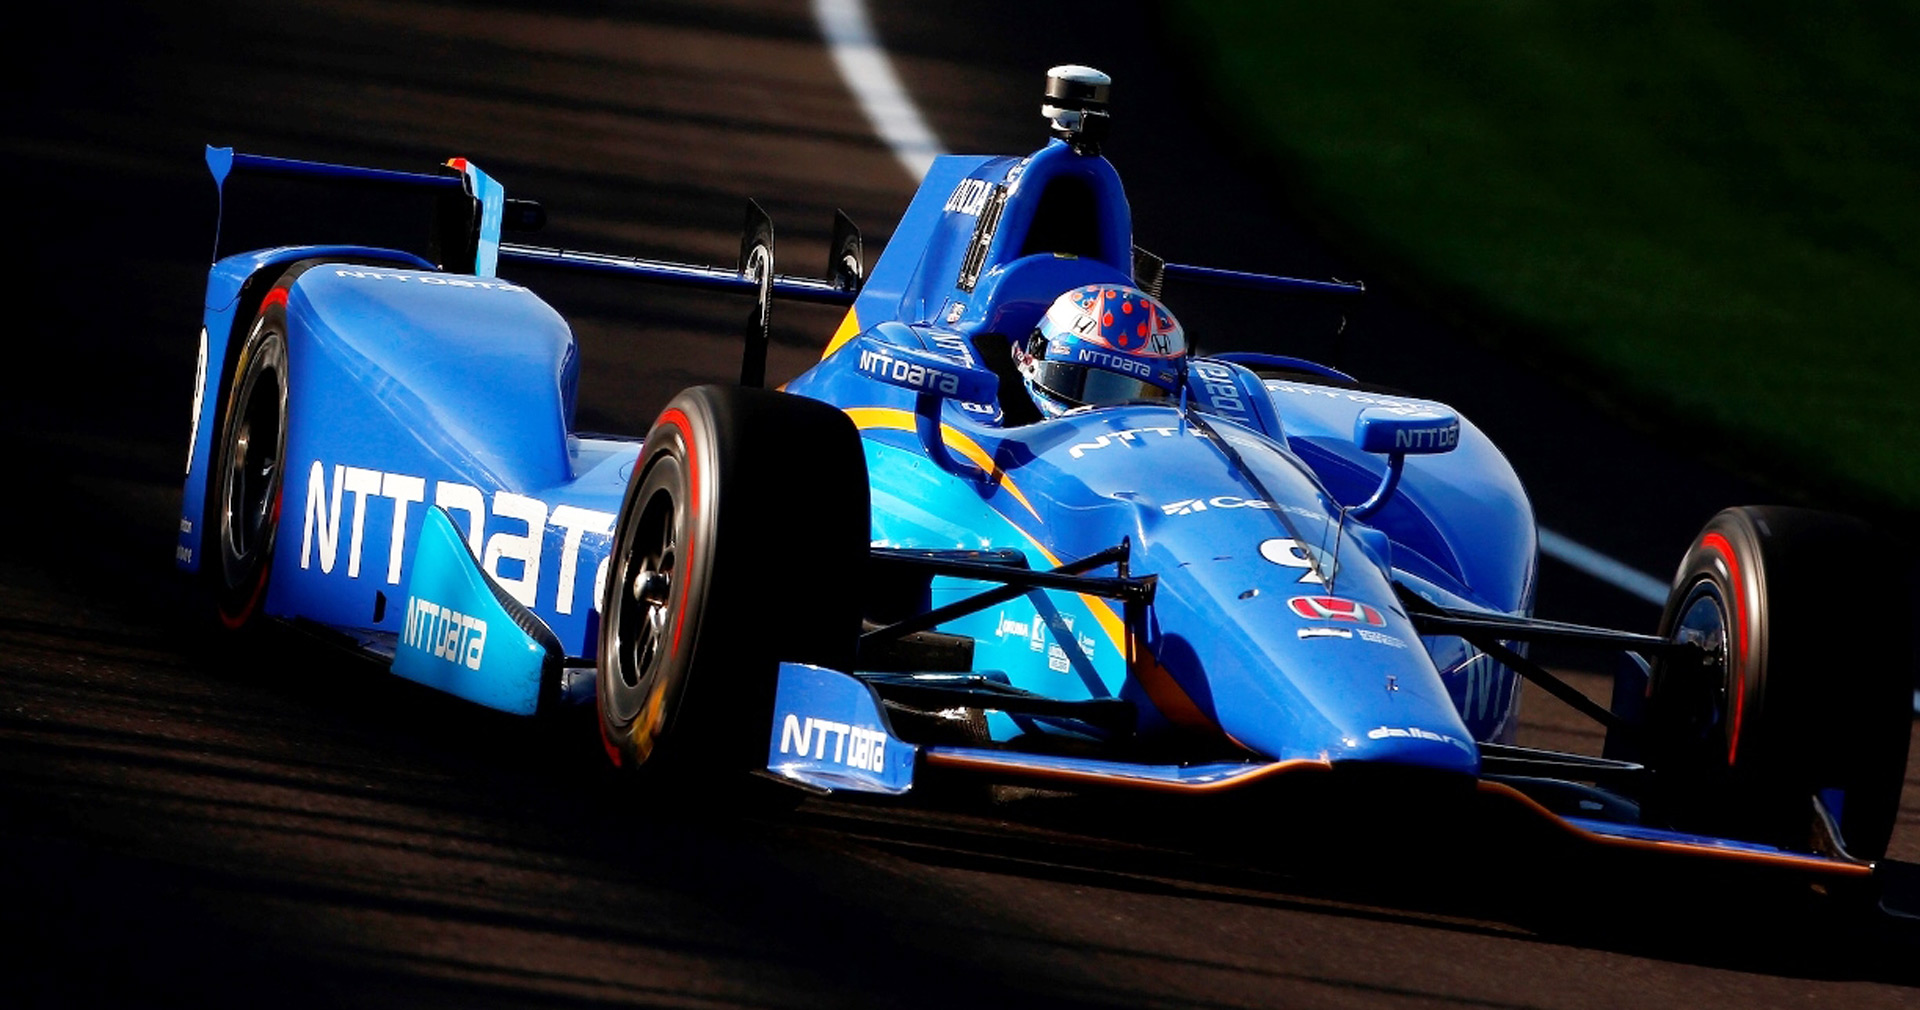 Scott Dixon Secures Pole For 17 Indy 500 Fernando Alonso To Start 5th